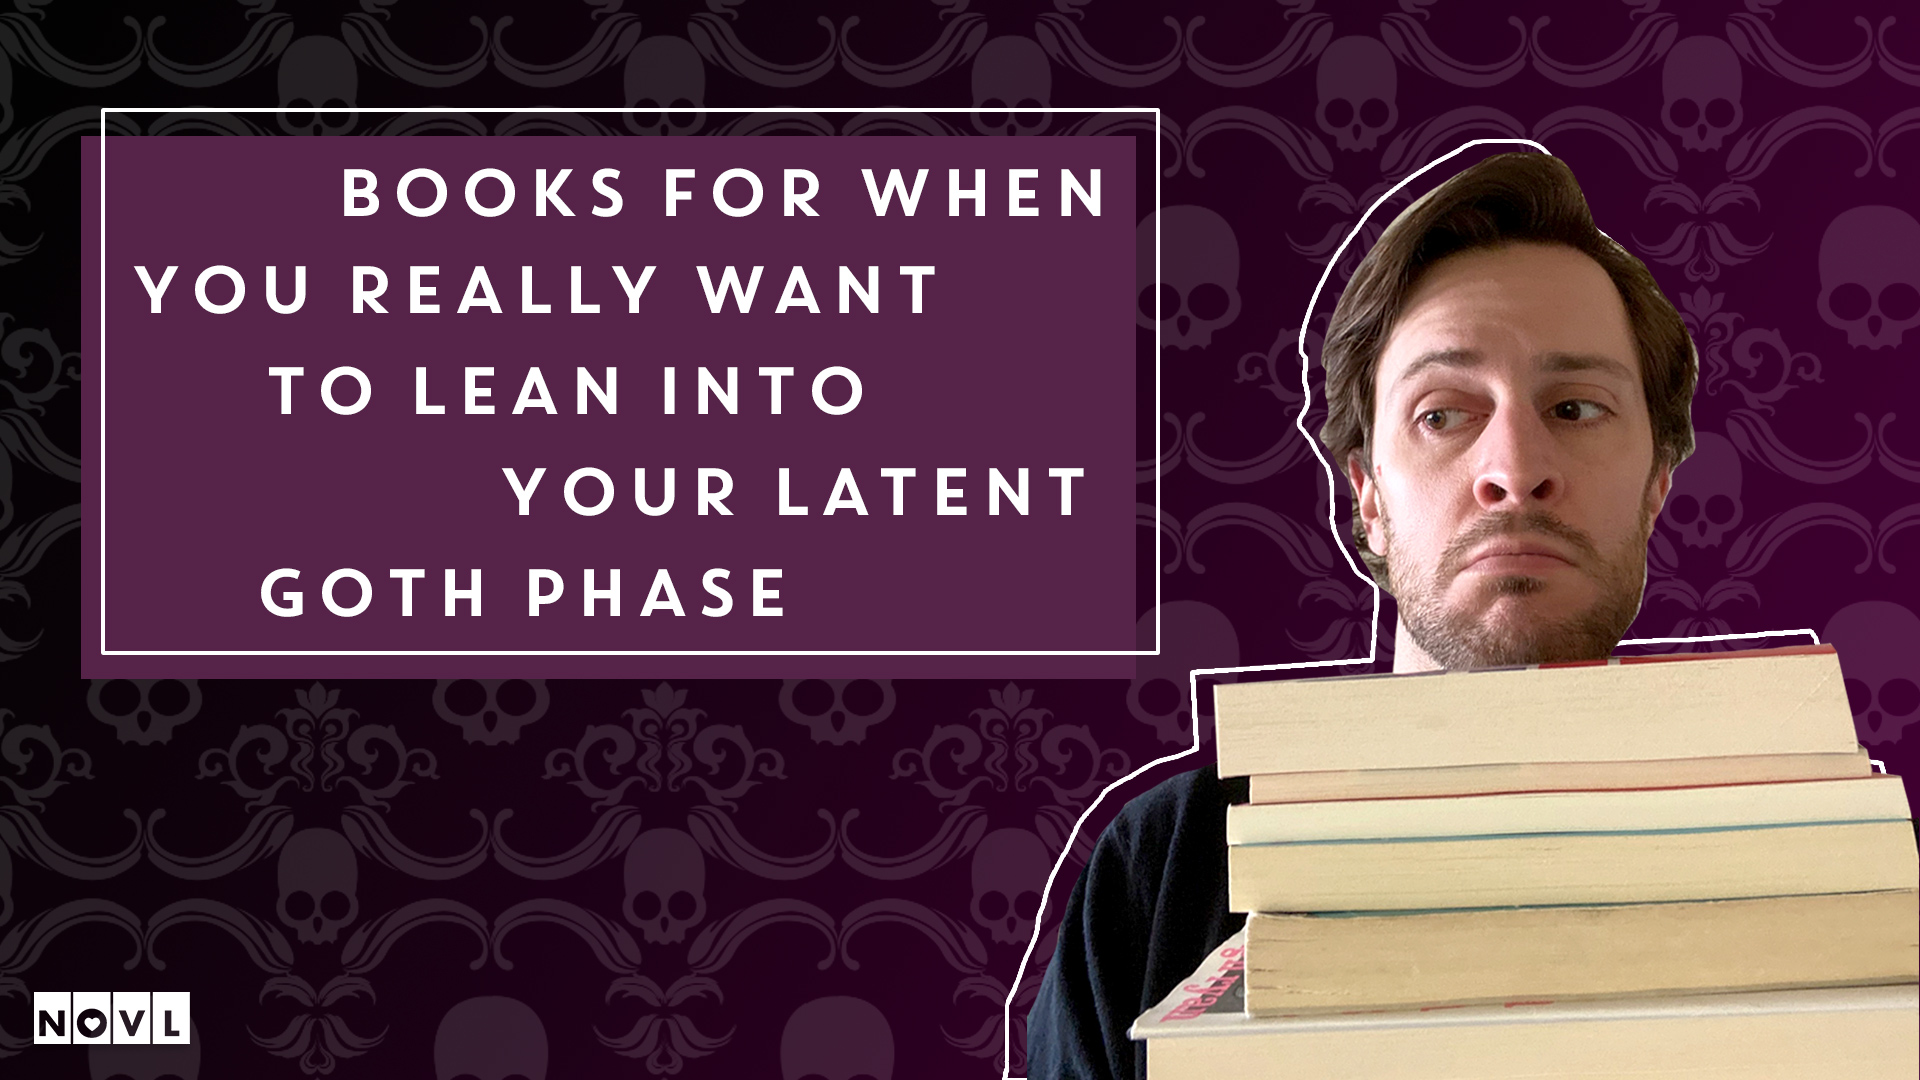 The NOVL Blog, Featured Image for Article: Books for When You Really Want to Lean into Your Latent Goth Phase